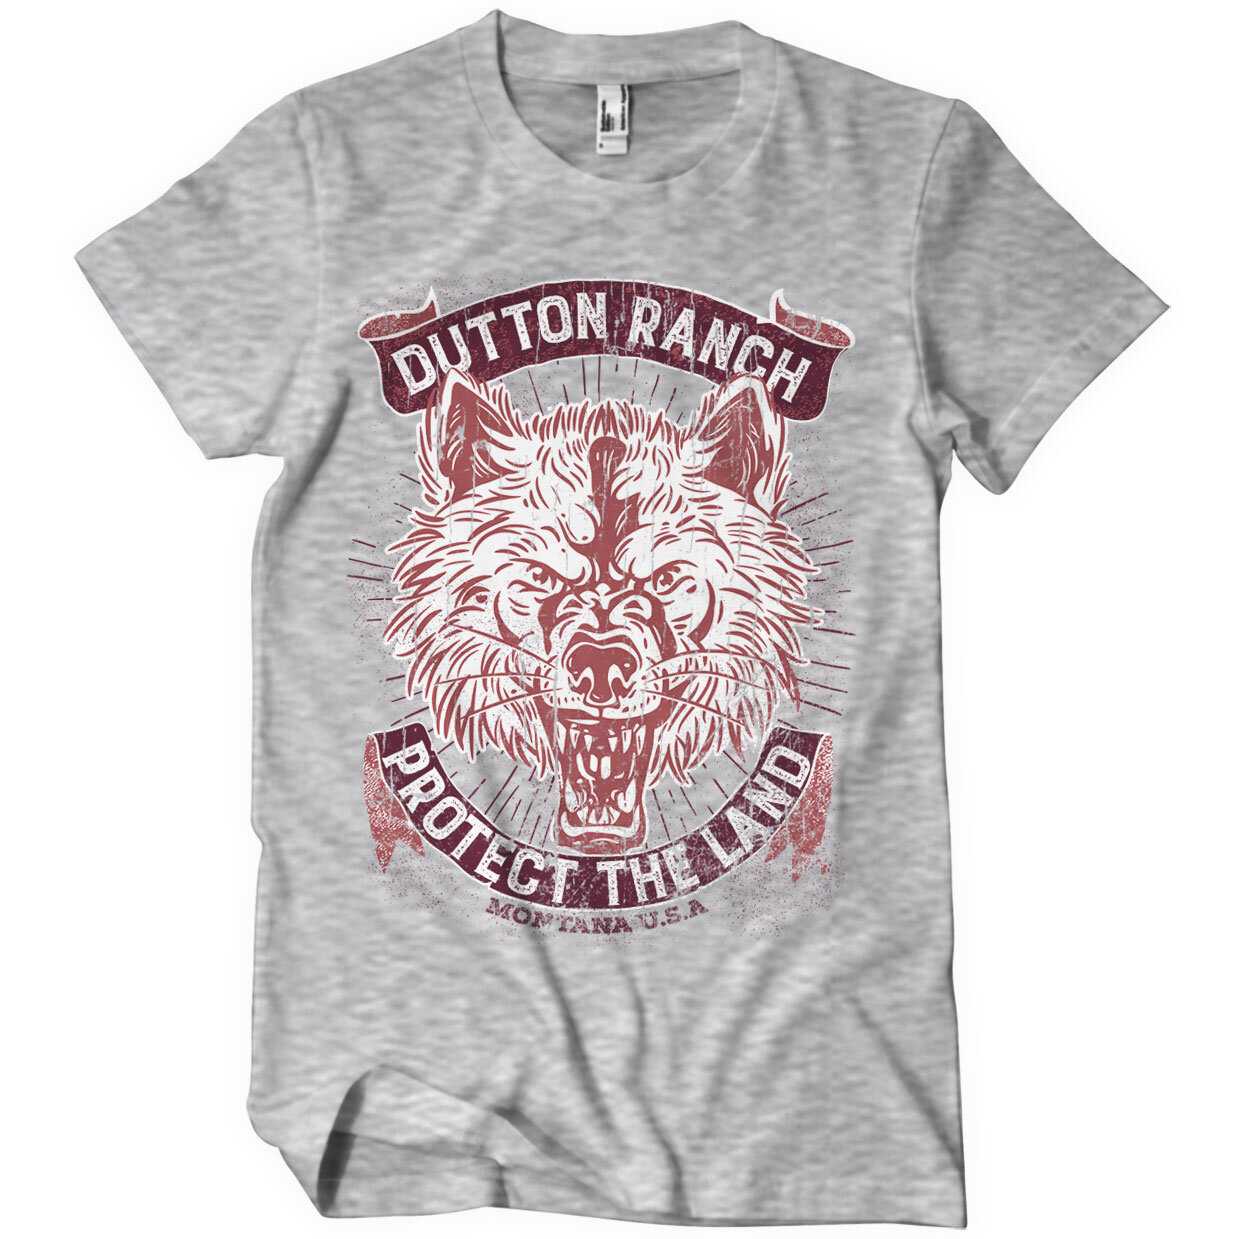 Dutton Ranch - Protect The Land T-Shirt